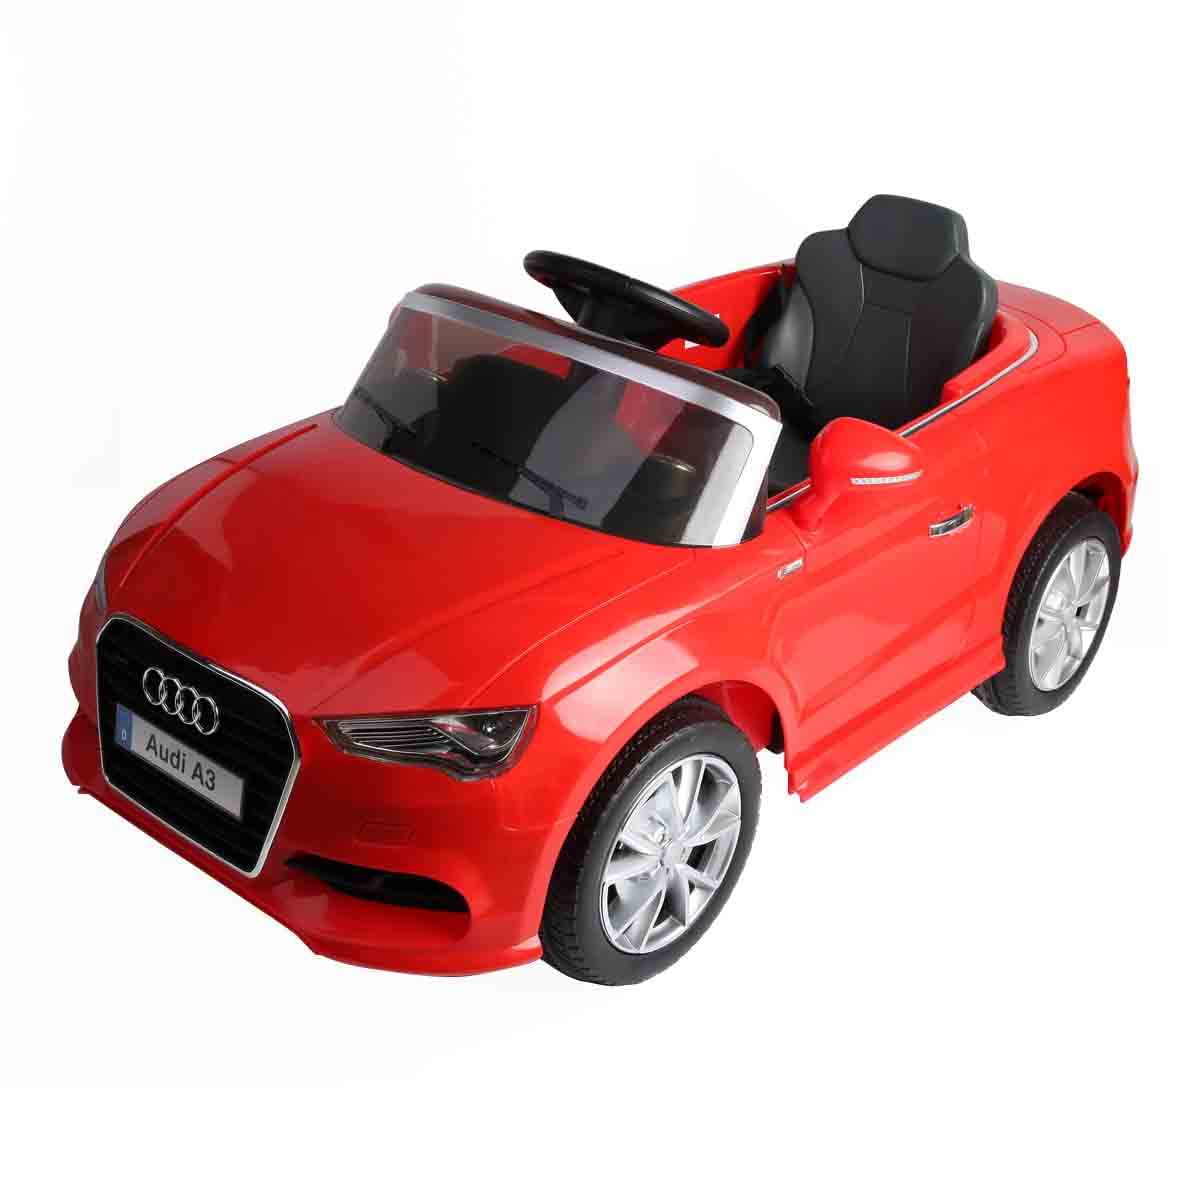 Topbuy  Audi A3 Licensed Kids Ride On Car 12V Electric Toy w/ Remote Control 